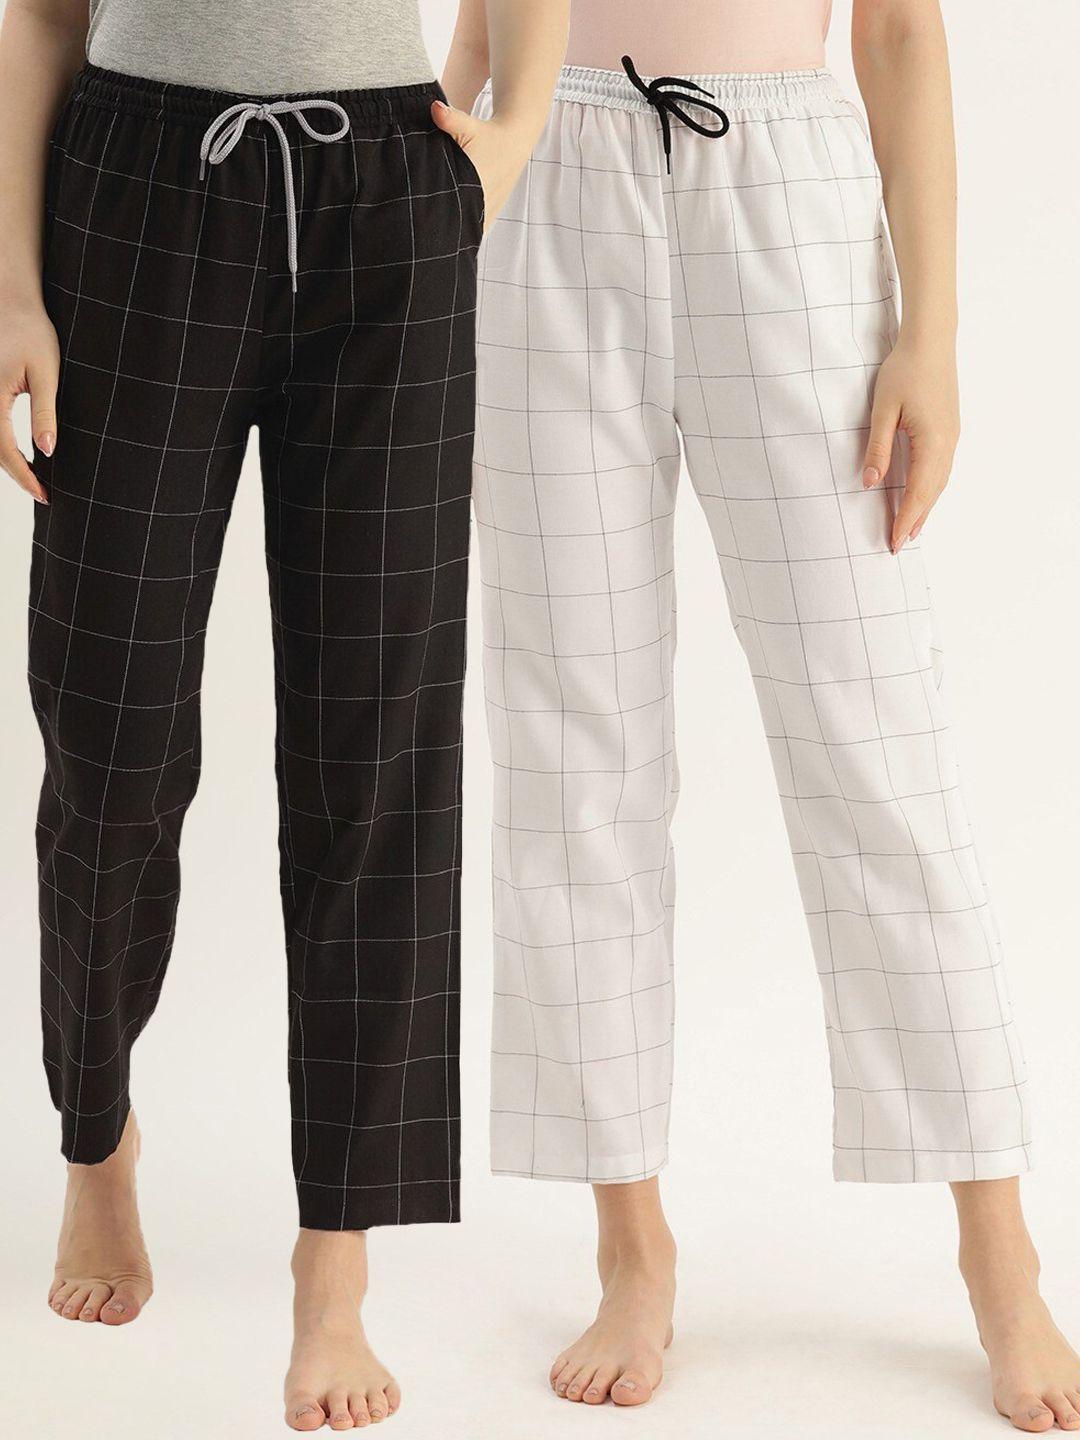 kryptic women pack of 2 black & white checked pure cotton lounge pants